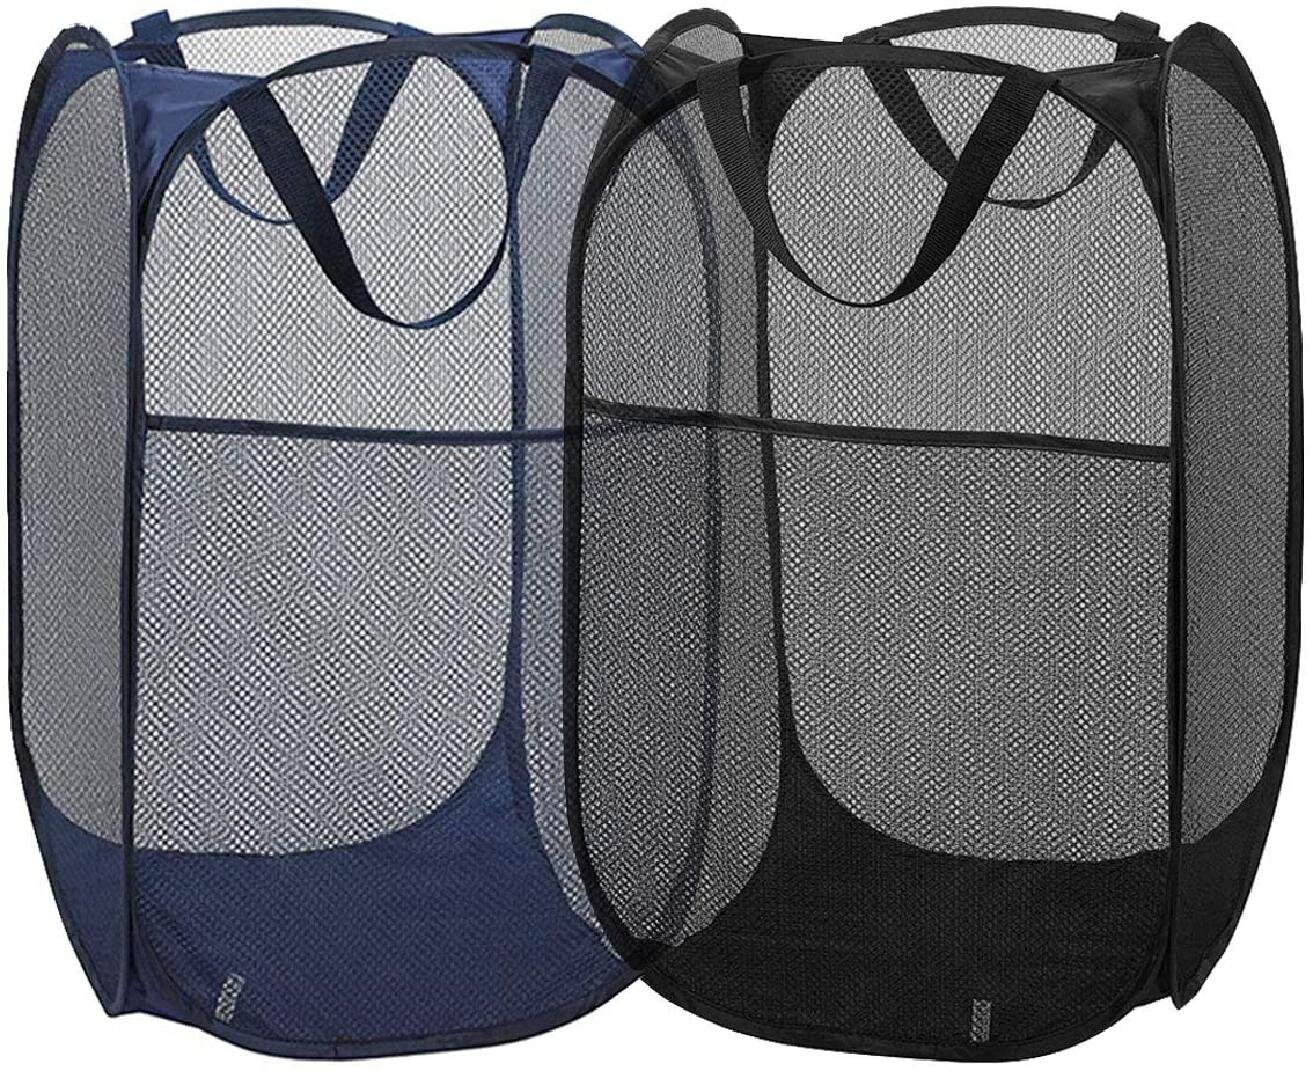 with Portable Black 2 Packs Mesh Pop up Laundry Hamper Collapsible for Storage College Dorm or Travel Foldable Pop-Up Laundry Bags for Kids Room Durable Handles